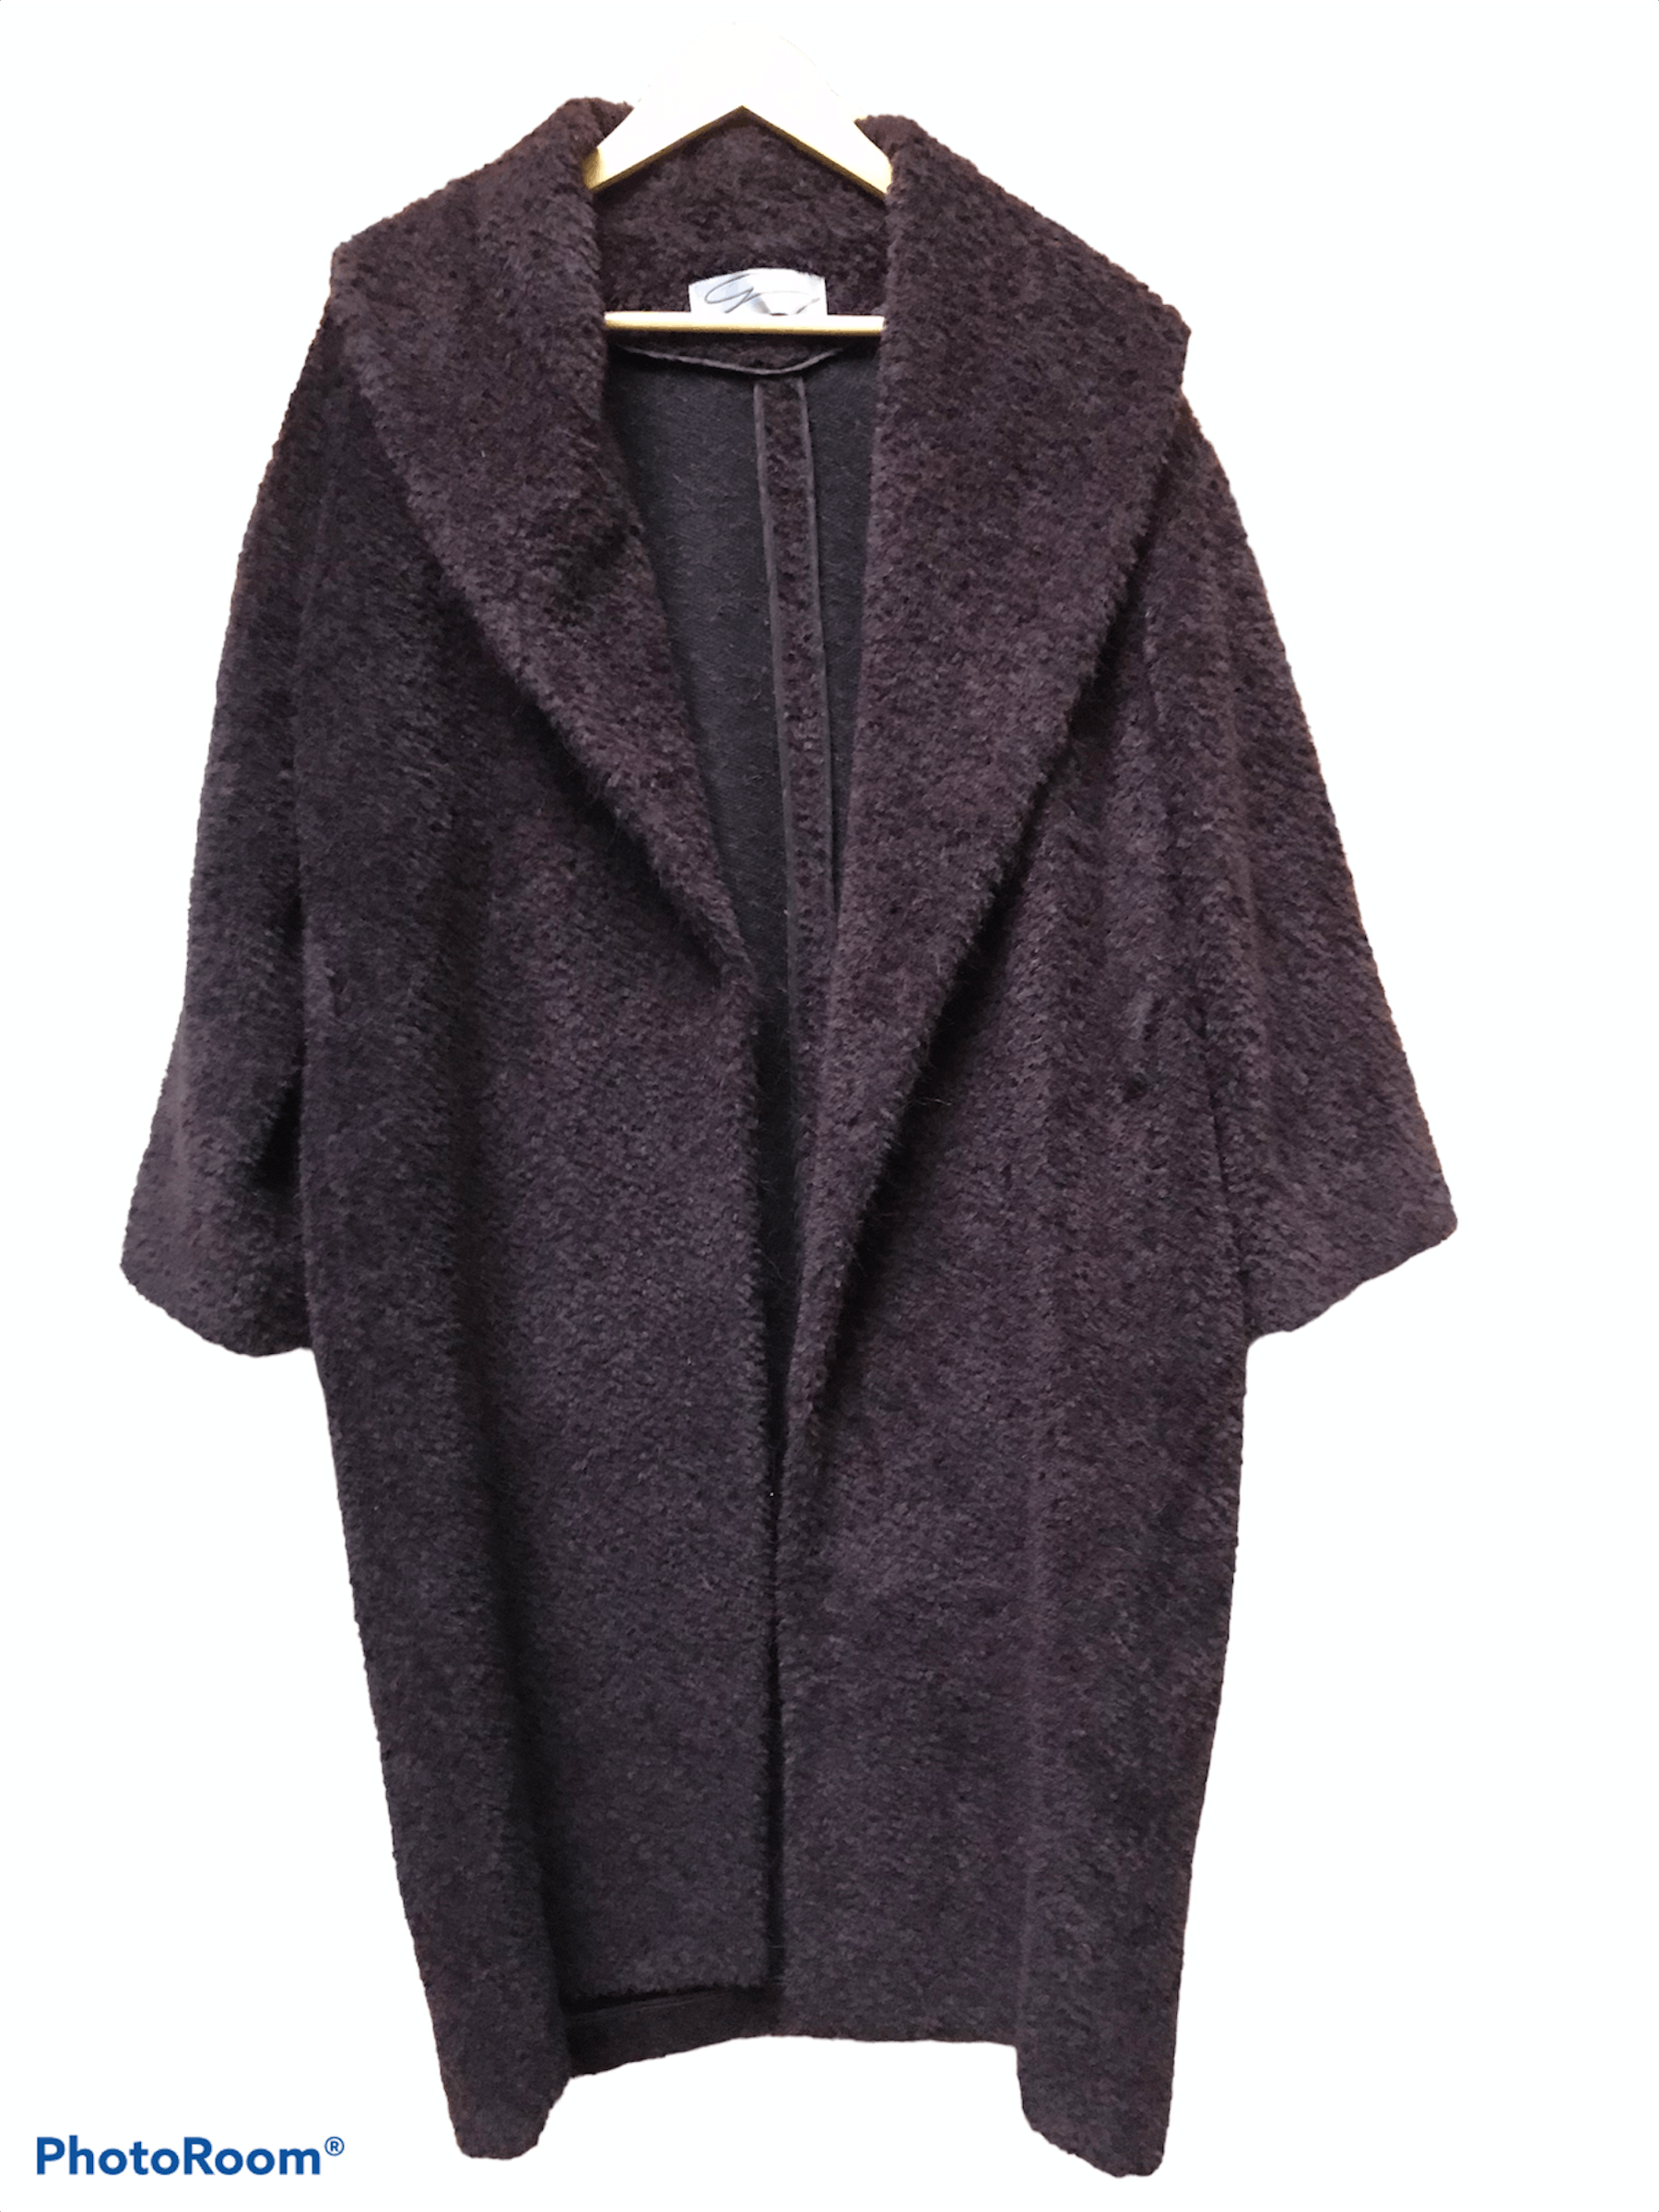 Gianni Versace Genny by Gianni Versace Alpaca Wool Button Less Coat Size L / US 10 / IT 46 - 1 Preview